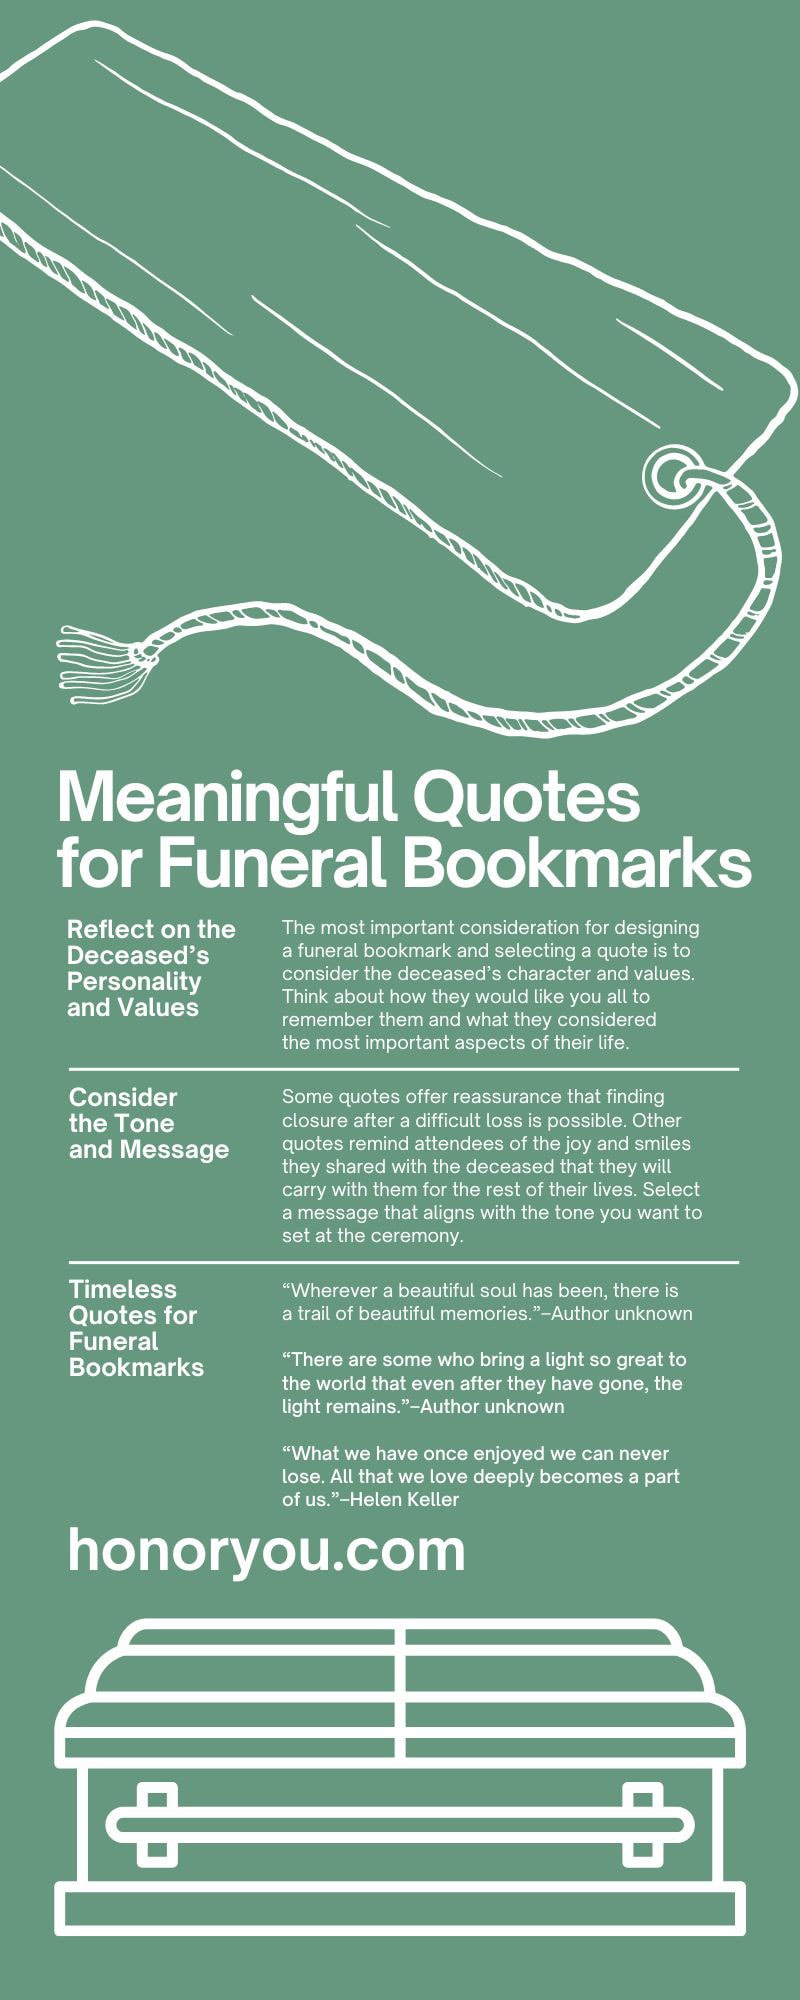 7 Meaningful Quotes for Funeral Bookmarks